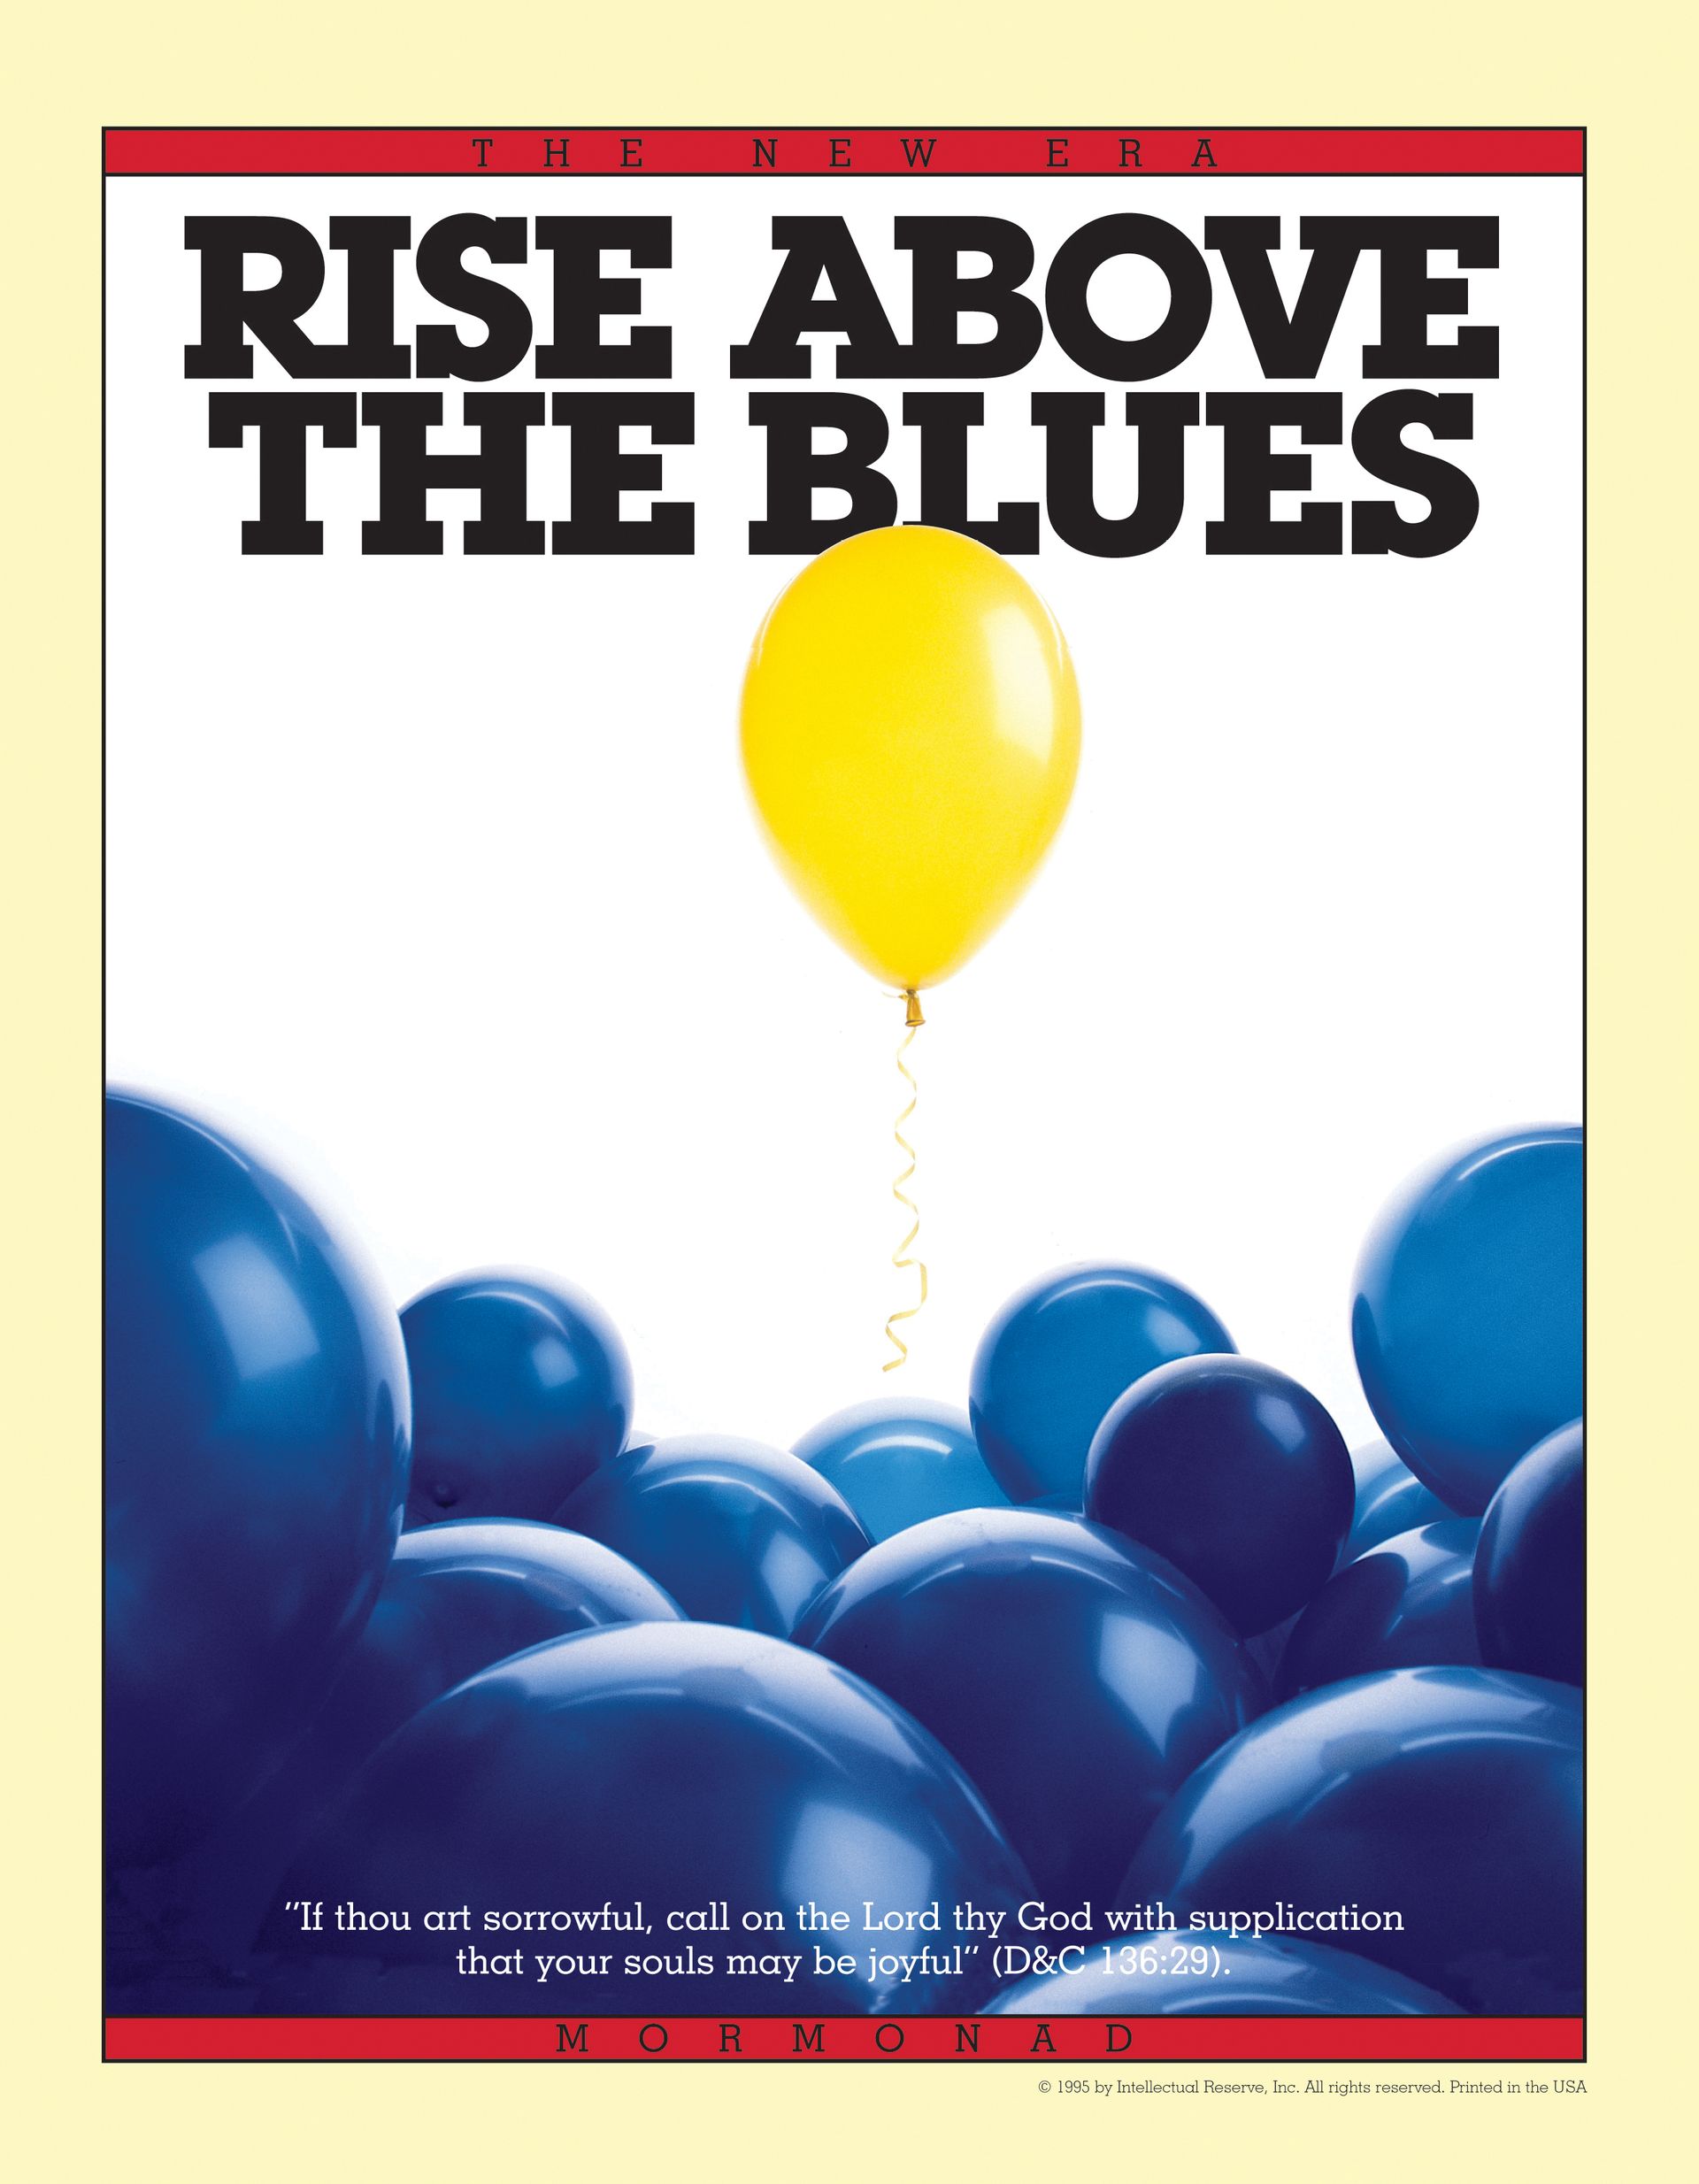 Rise above the Blues. “If thou art sorrowful, call on the Lord thy God with supplication, that your souls may be joyful” (D&C 136:29). Apr. 1988 © undefined ipCode 1.